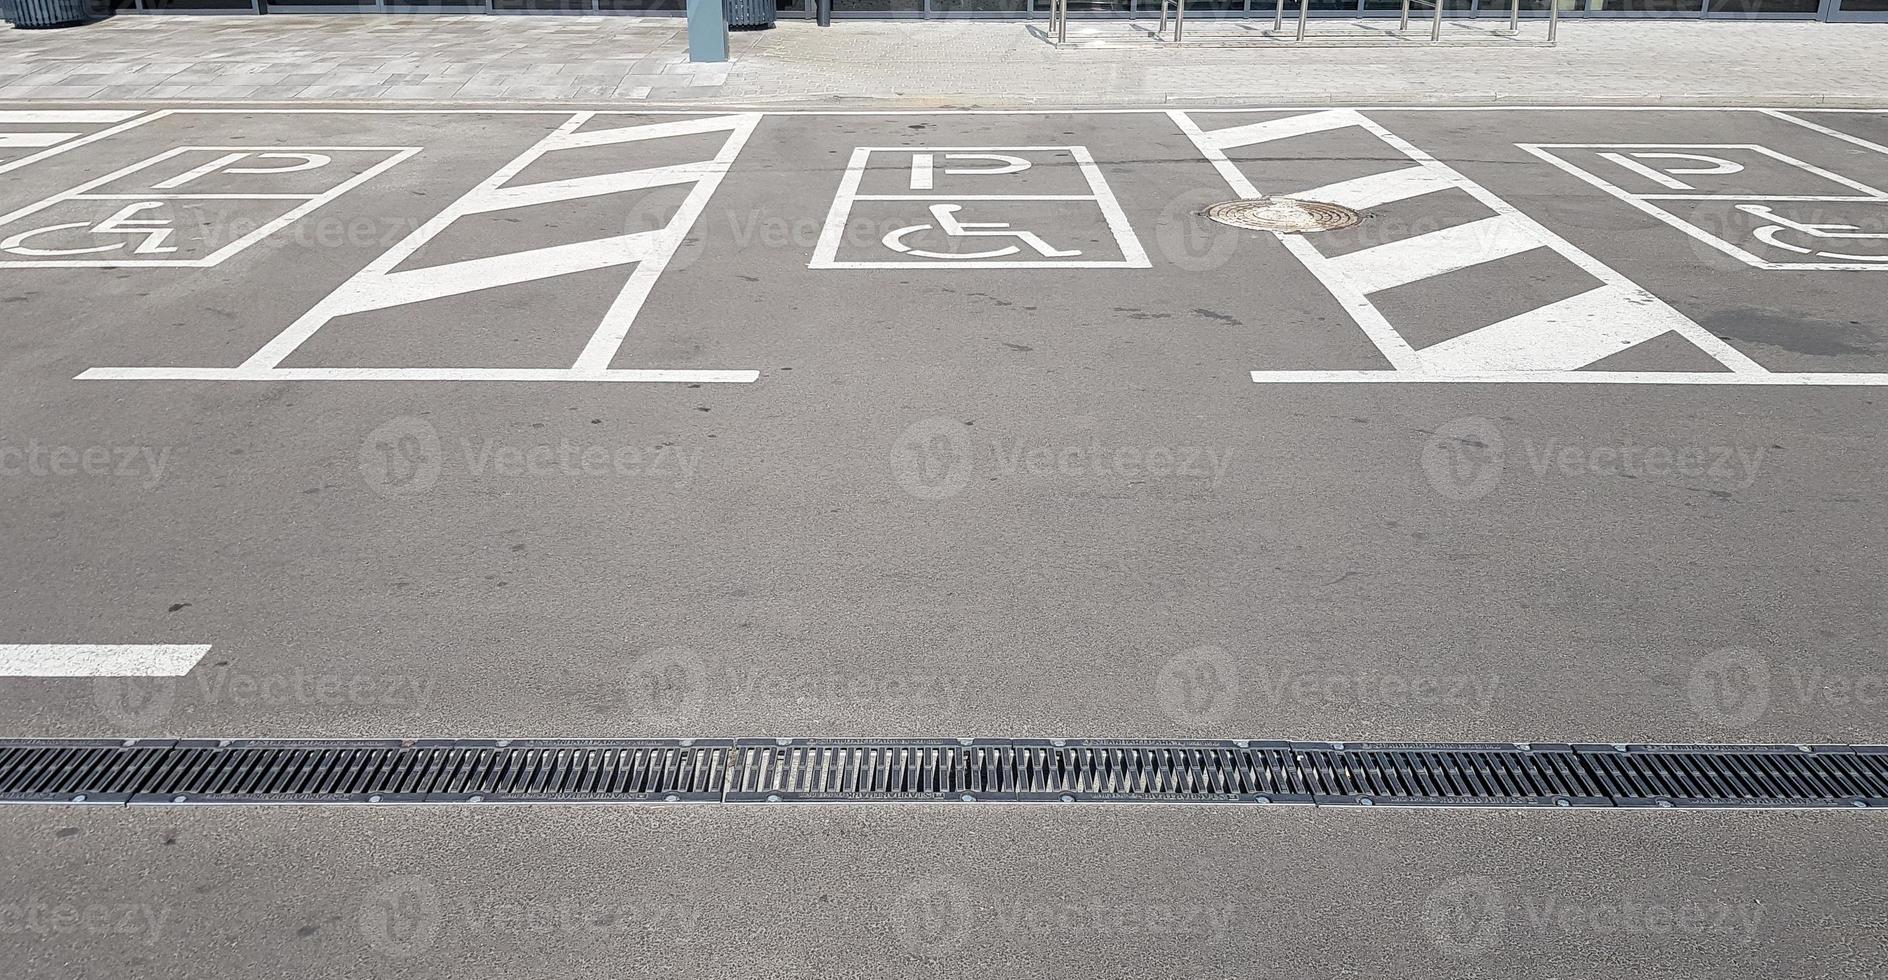 International handicap symbol in a parking lot of a shopping center. The space is clearly indicated on both sides by additional white diagonal stripes photo